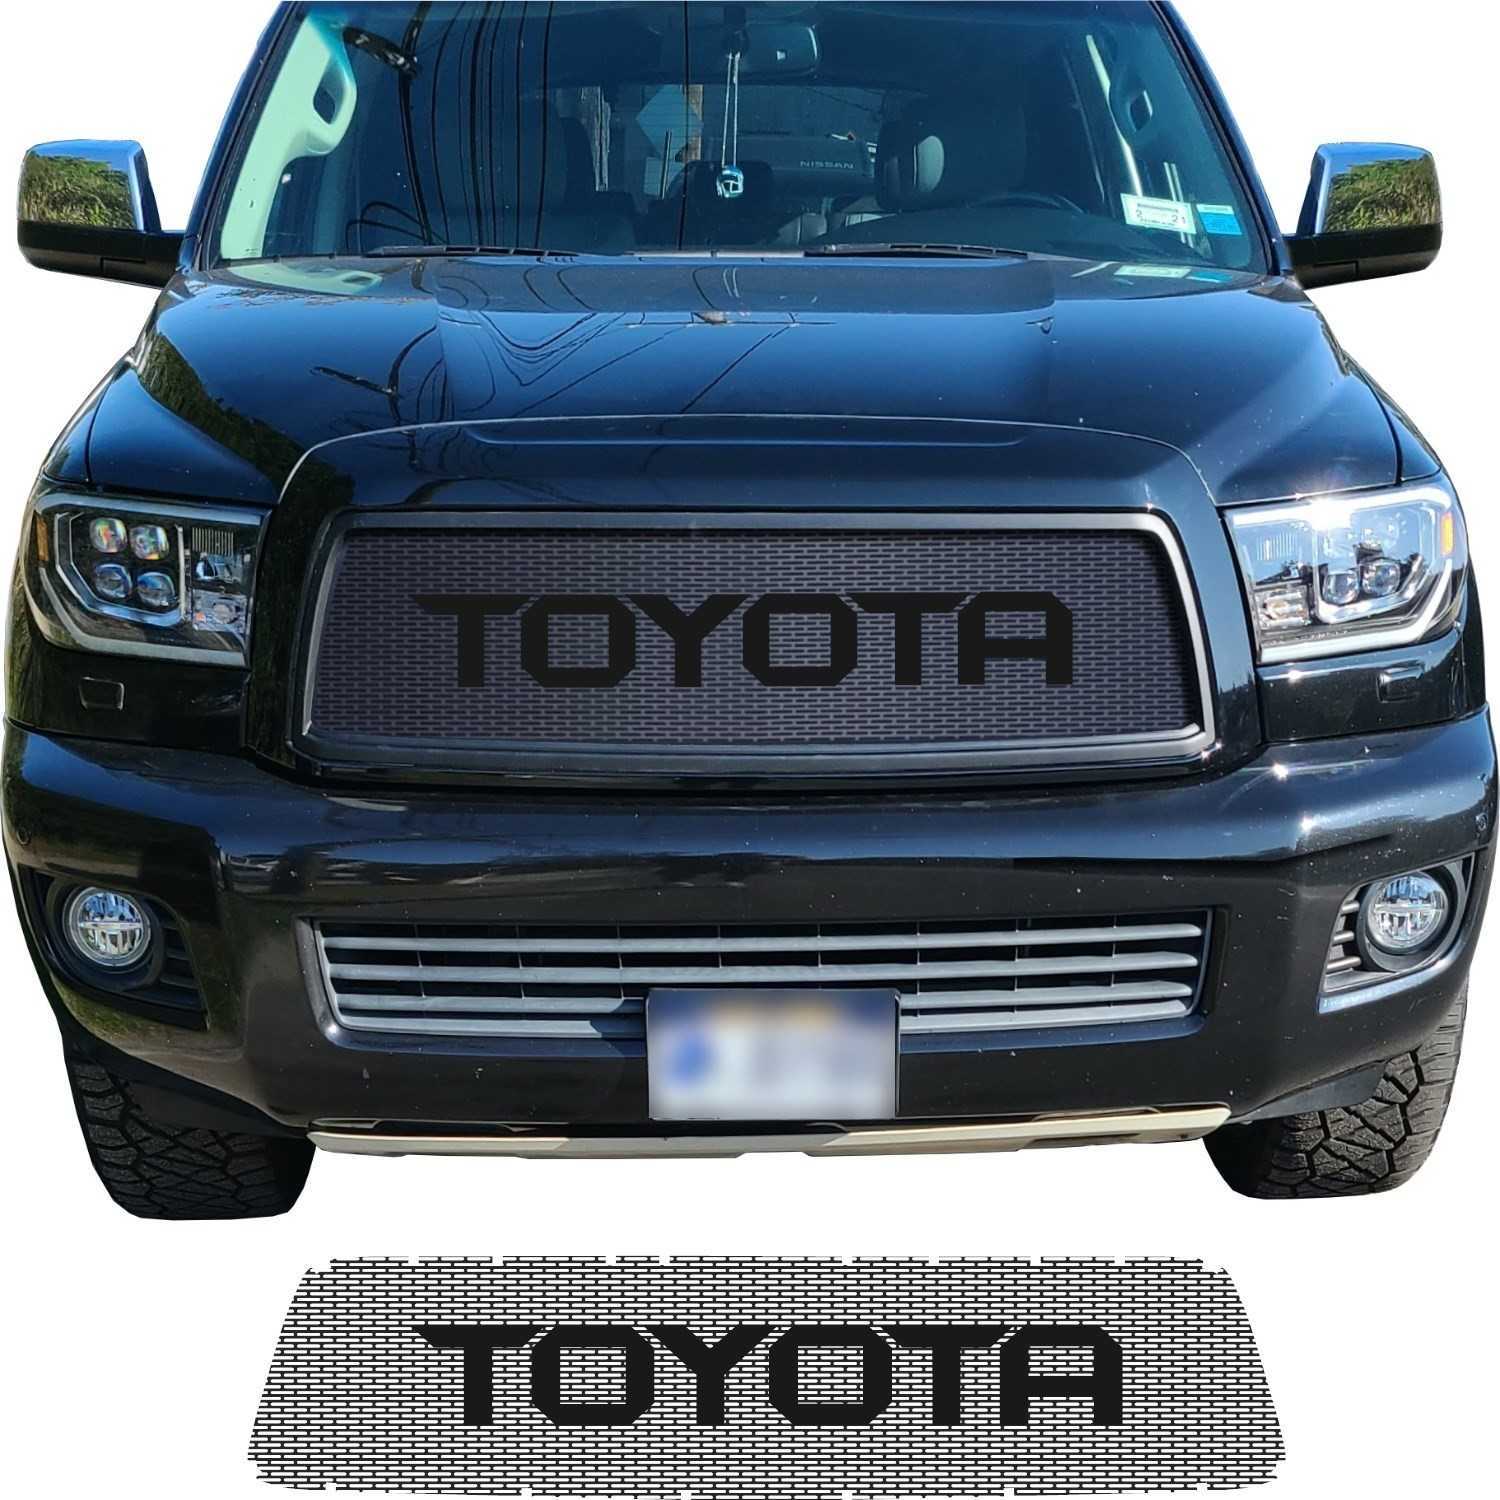 2008 - 2017 Toyota Sequoia Grill Mesh with Big Letters #1